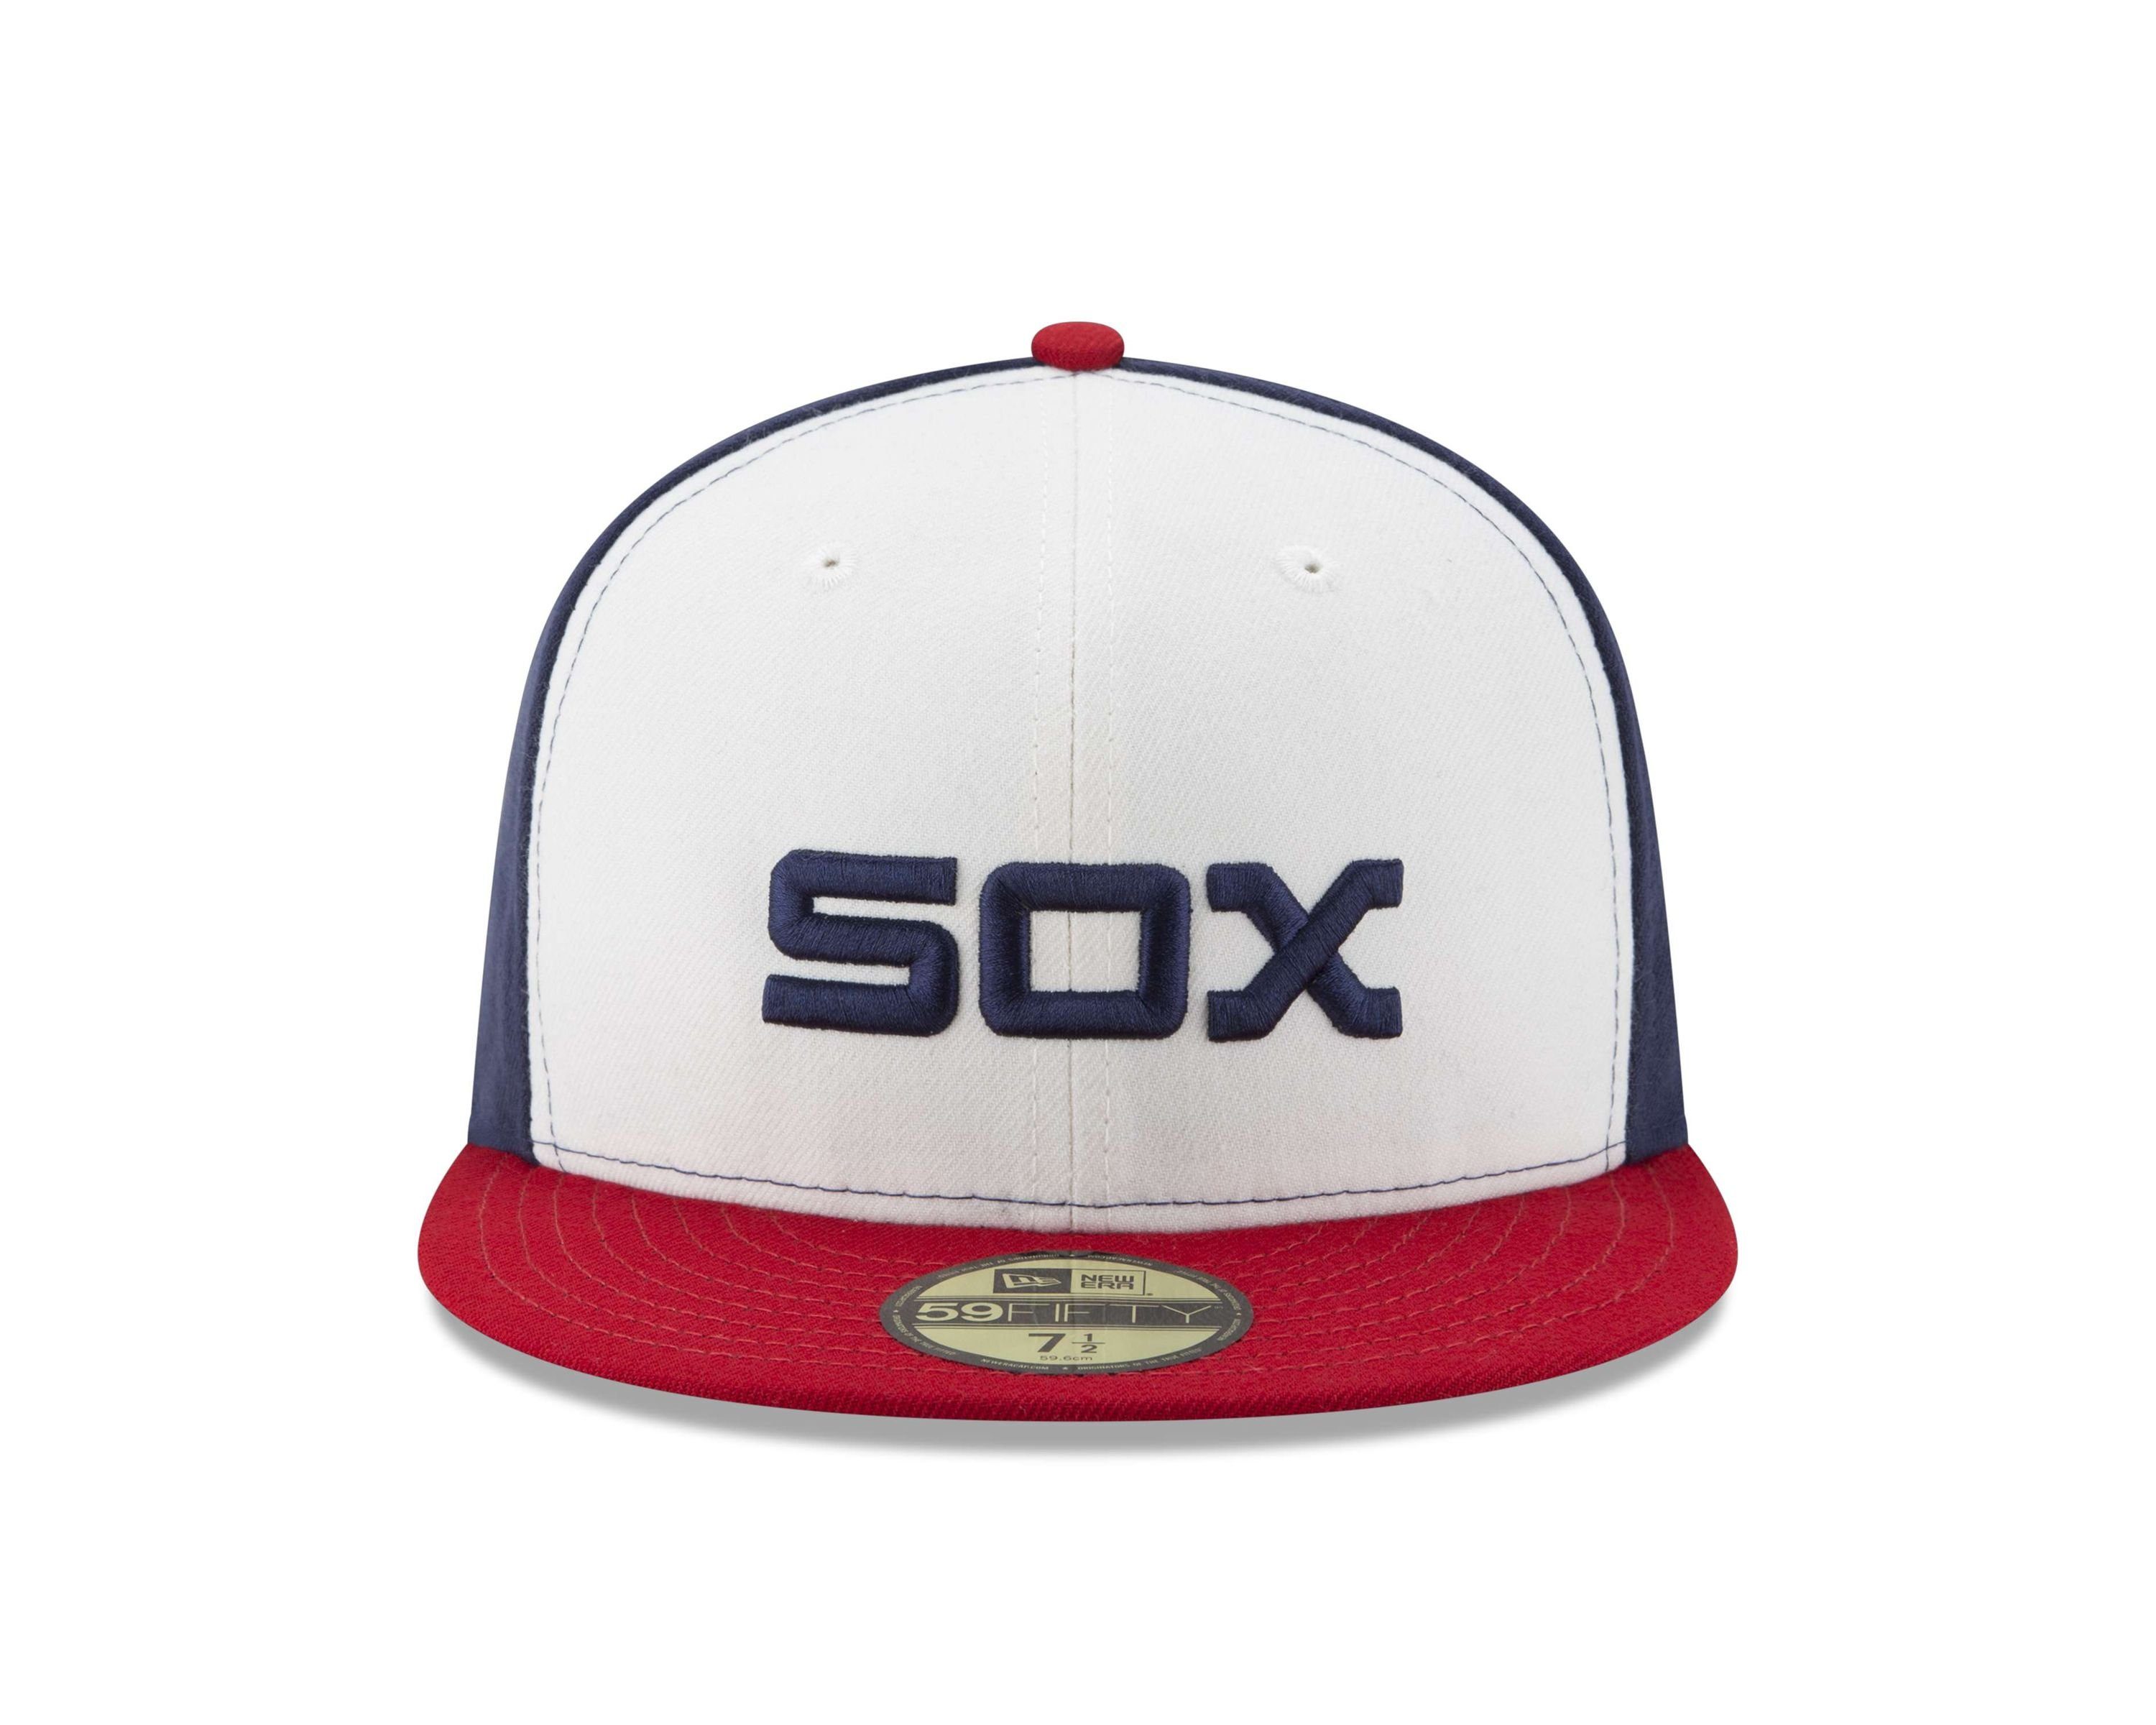 New Cap Collection Alt Sox Authentic MLB White Era Chicago Fitted